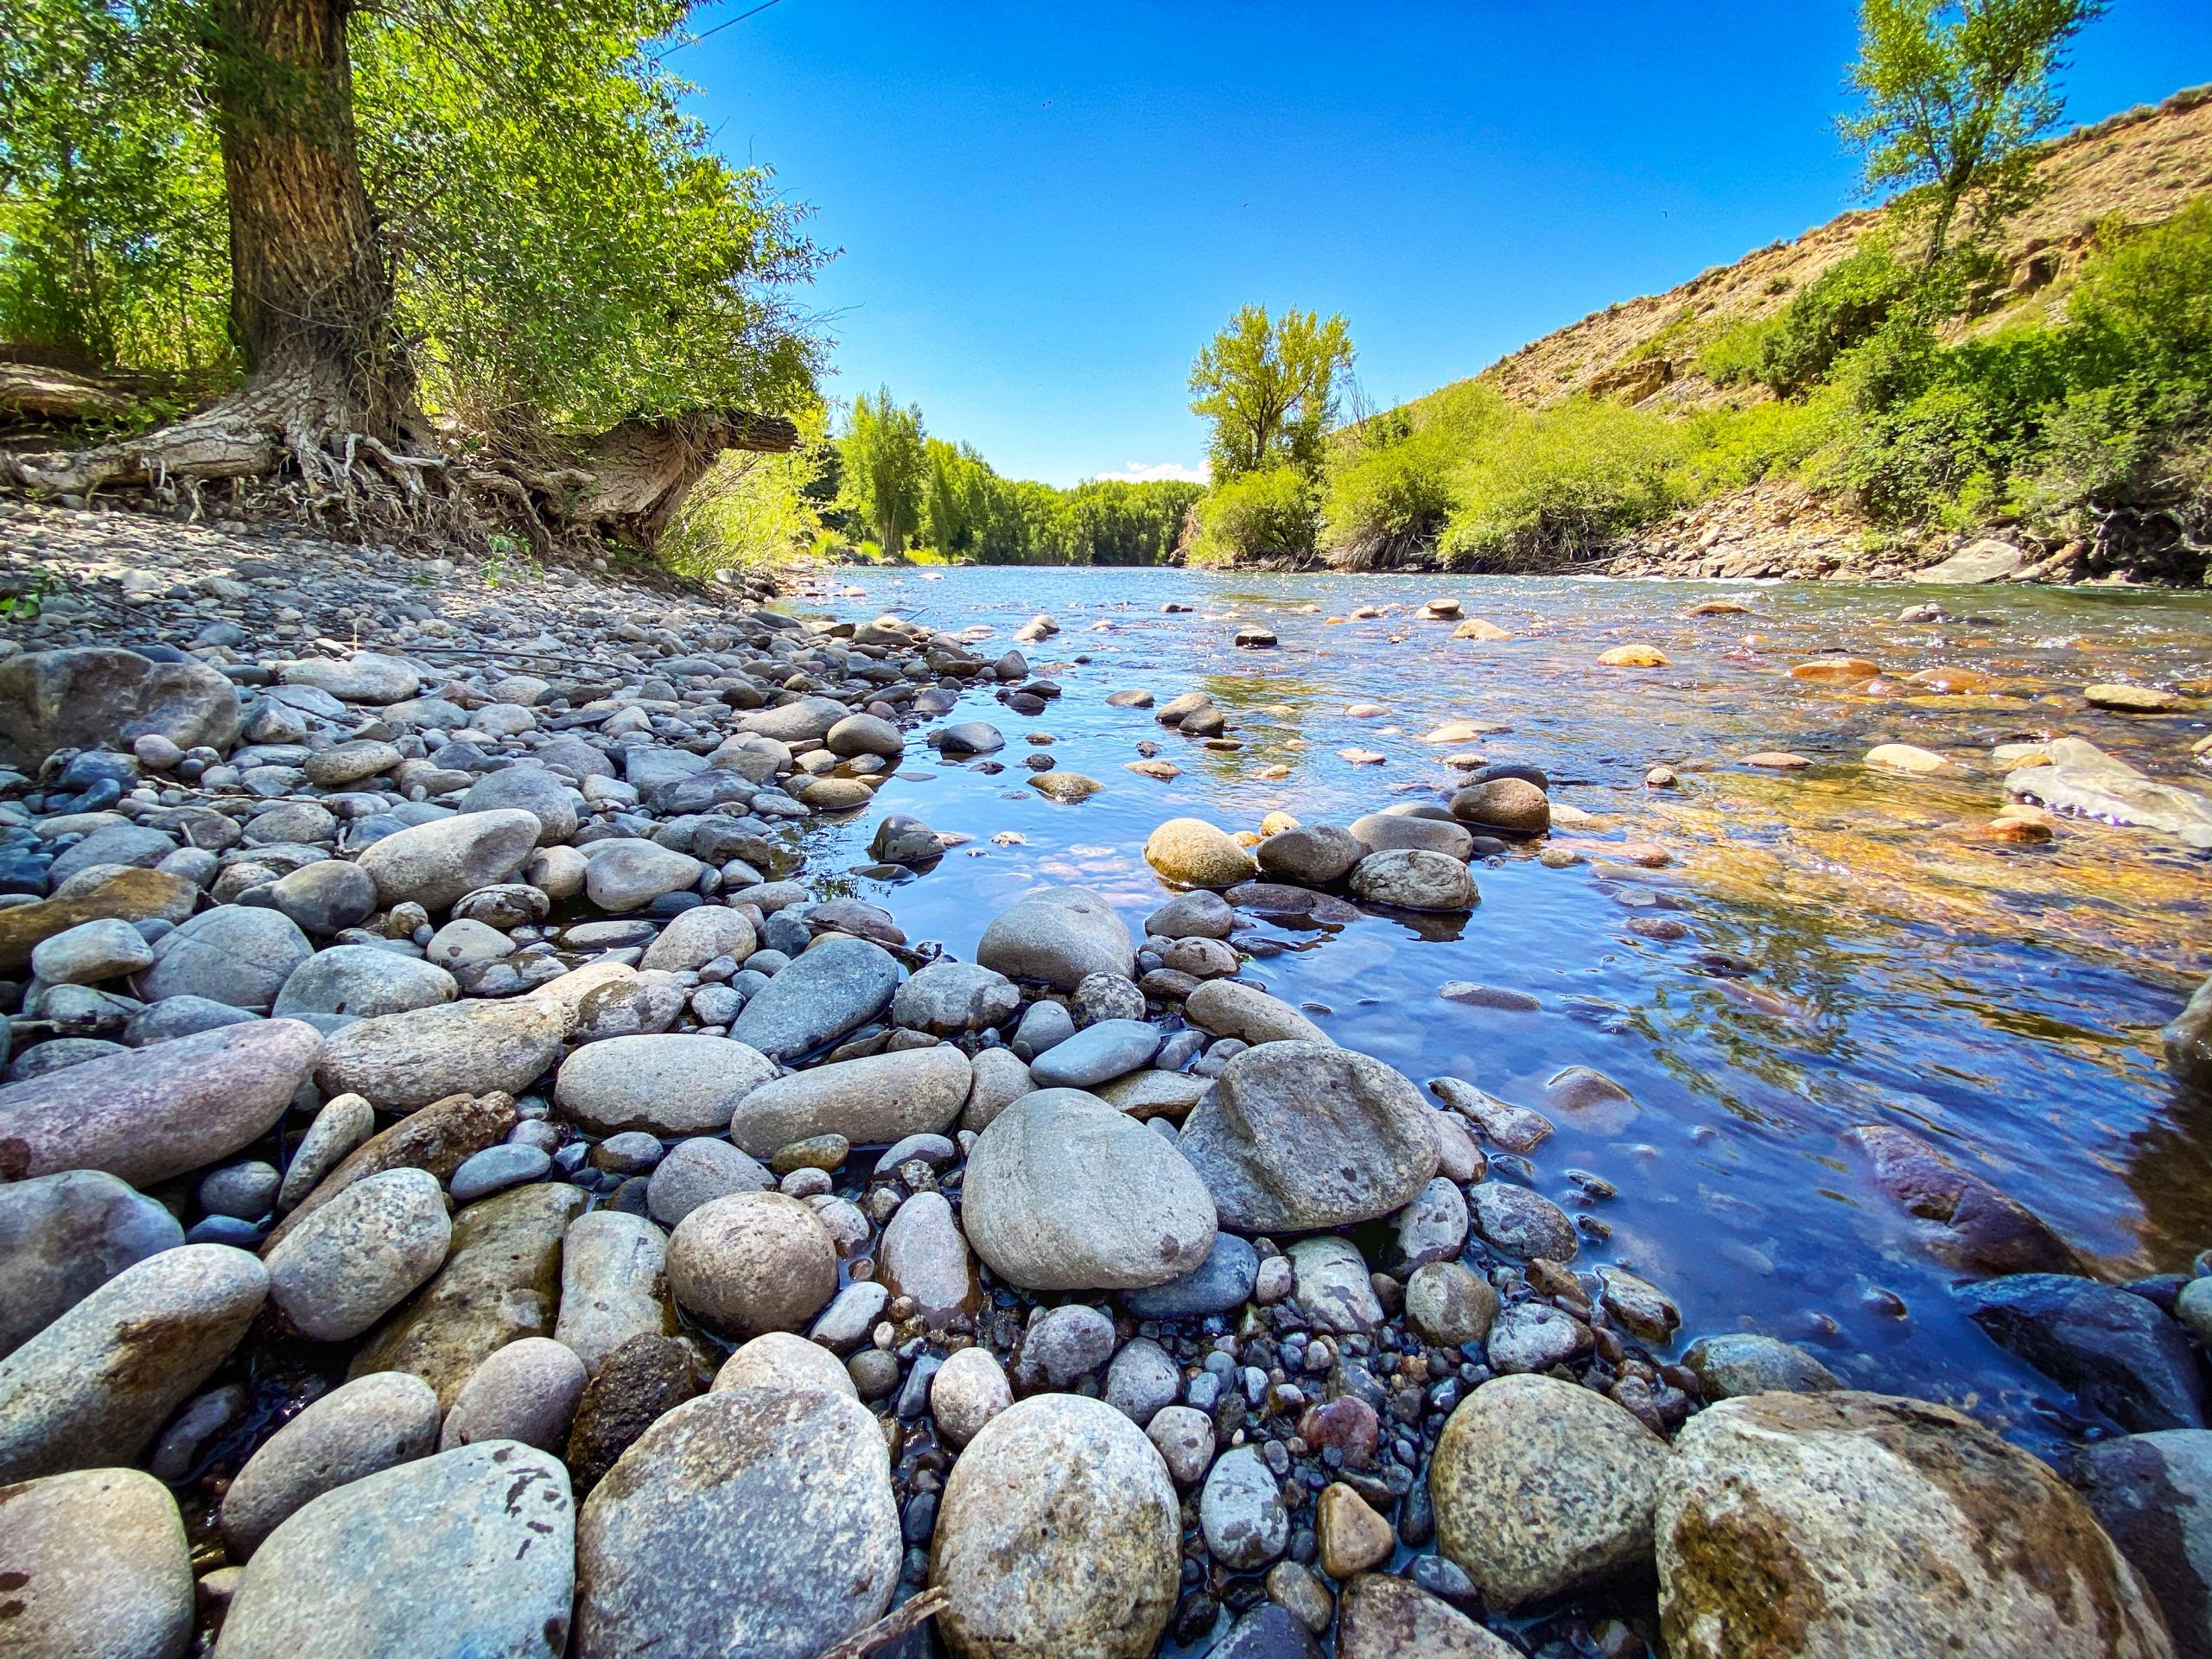 The rocky bank of the Gunnison River in late summer